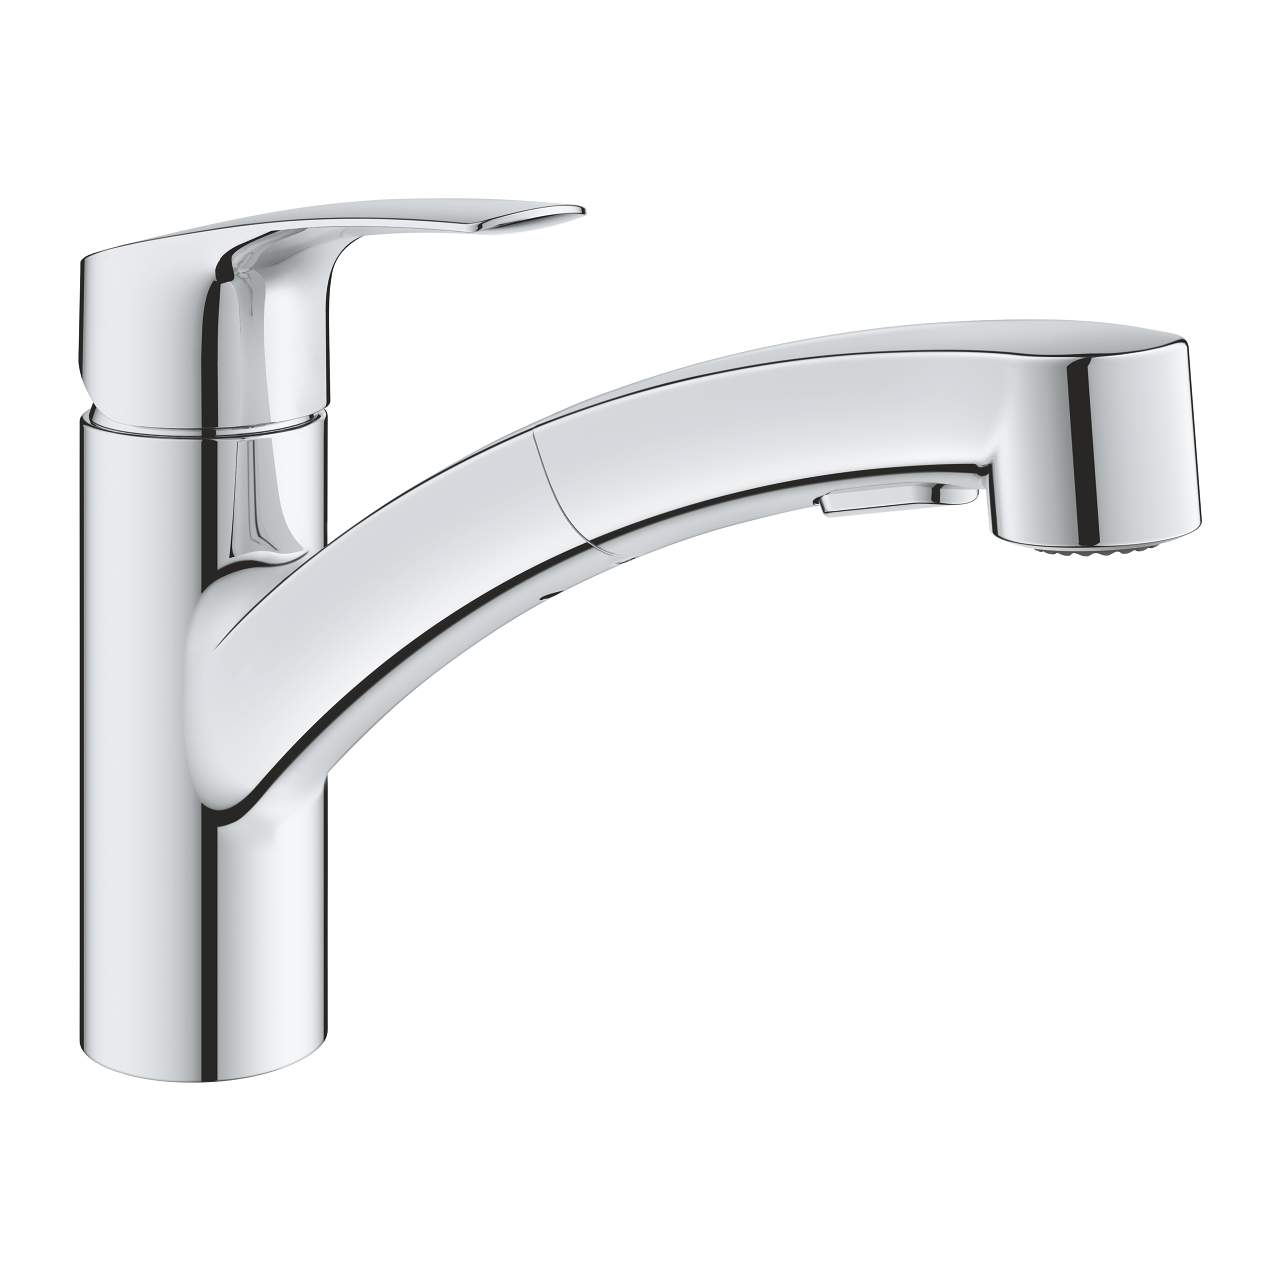  Grohe EUROSMART single lever sink mixer with pull-out shower